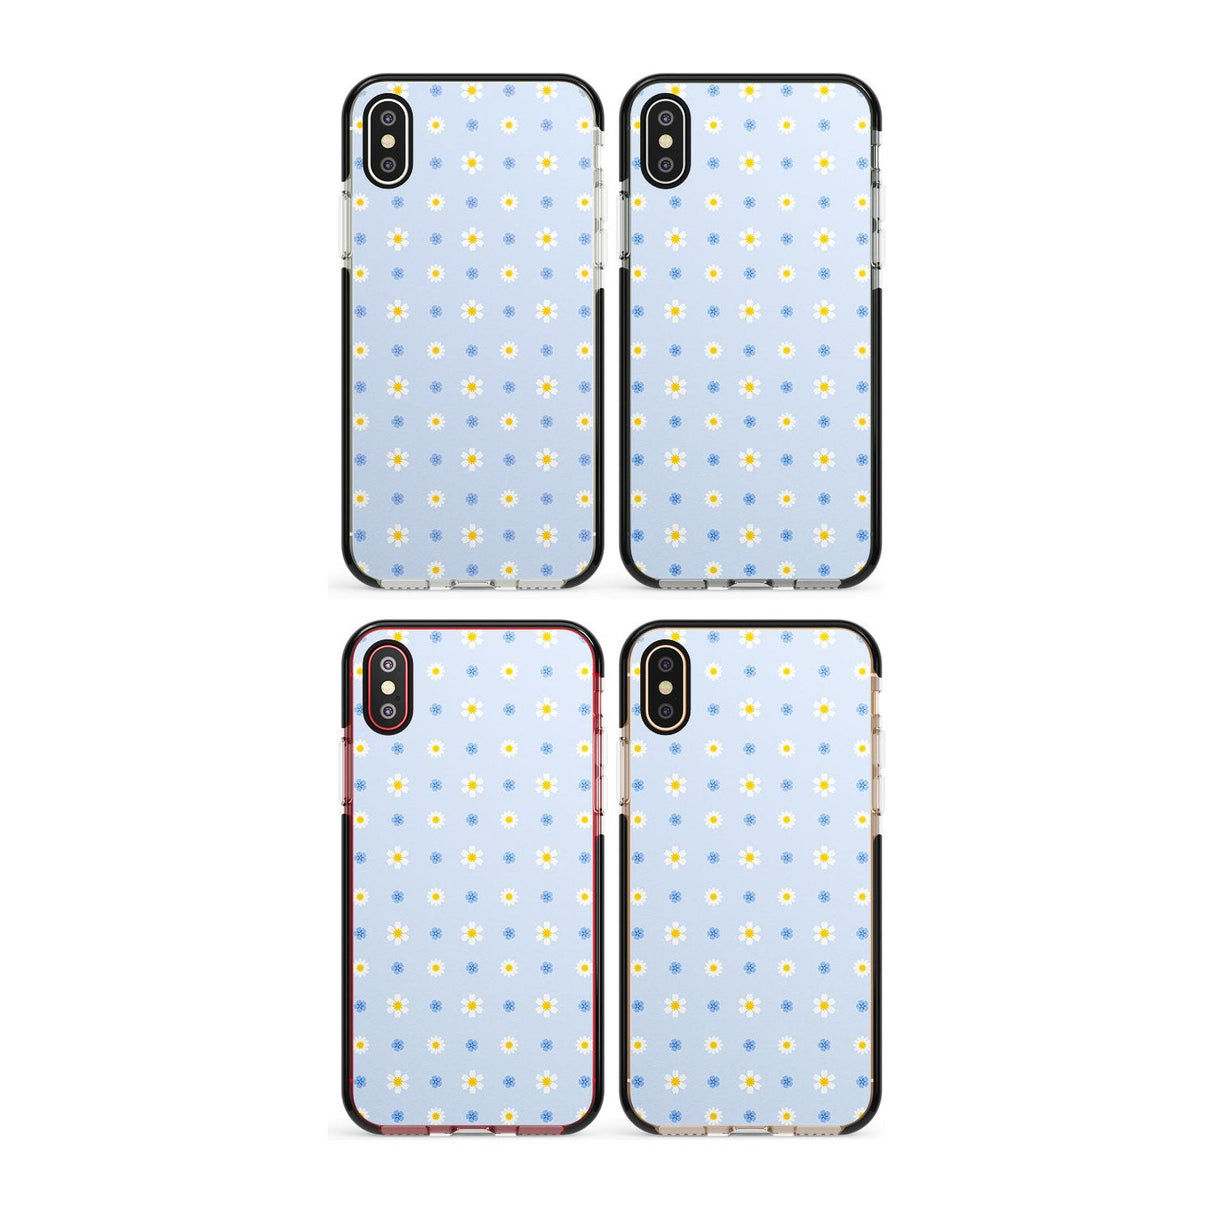 Venetian Meadow Phone Case for iPhone X XS Max XR